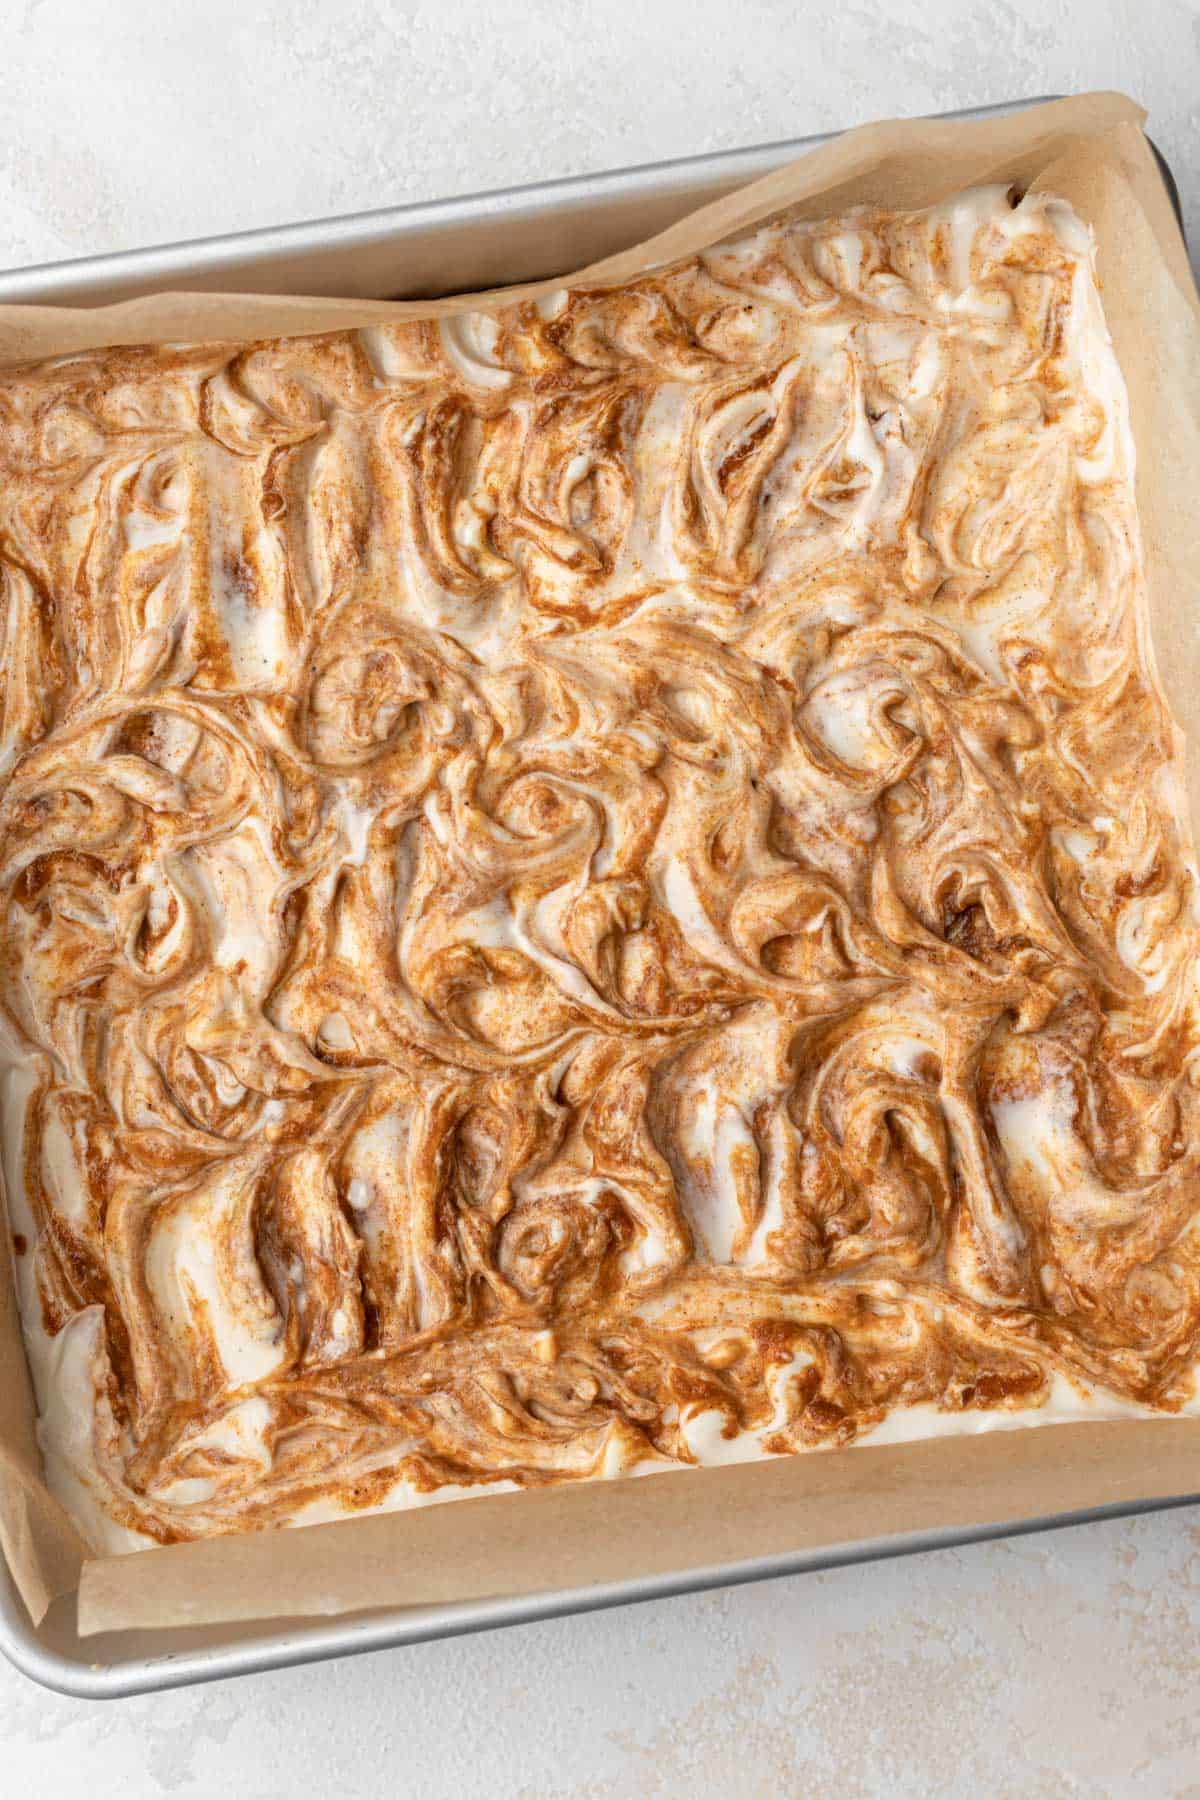 Spiced pumpkin puree swirled into the plain cheesecake batter in a cake pan.